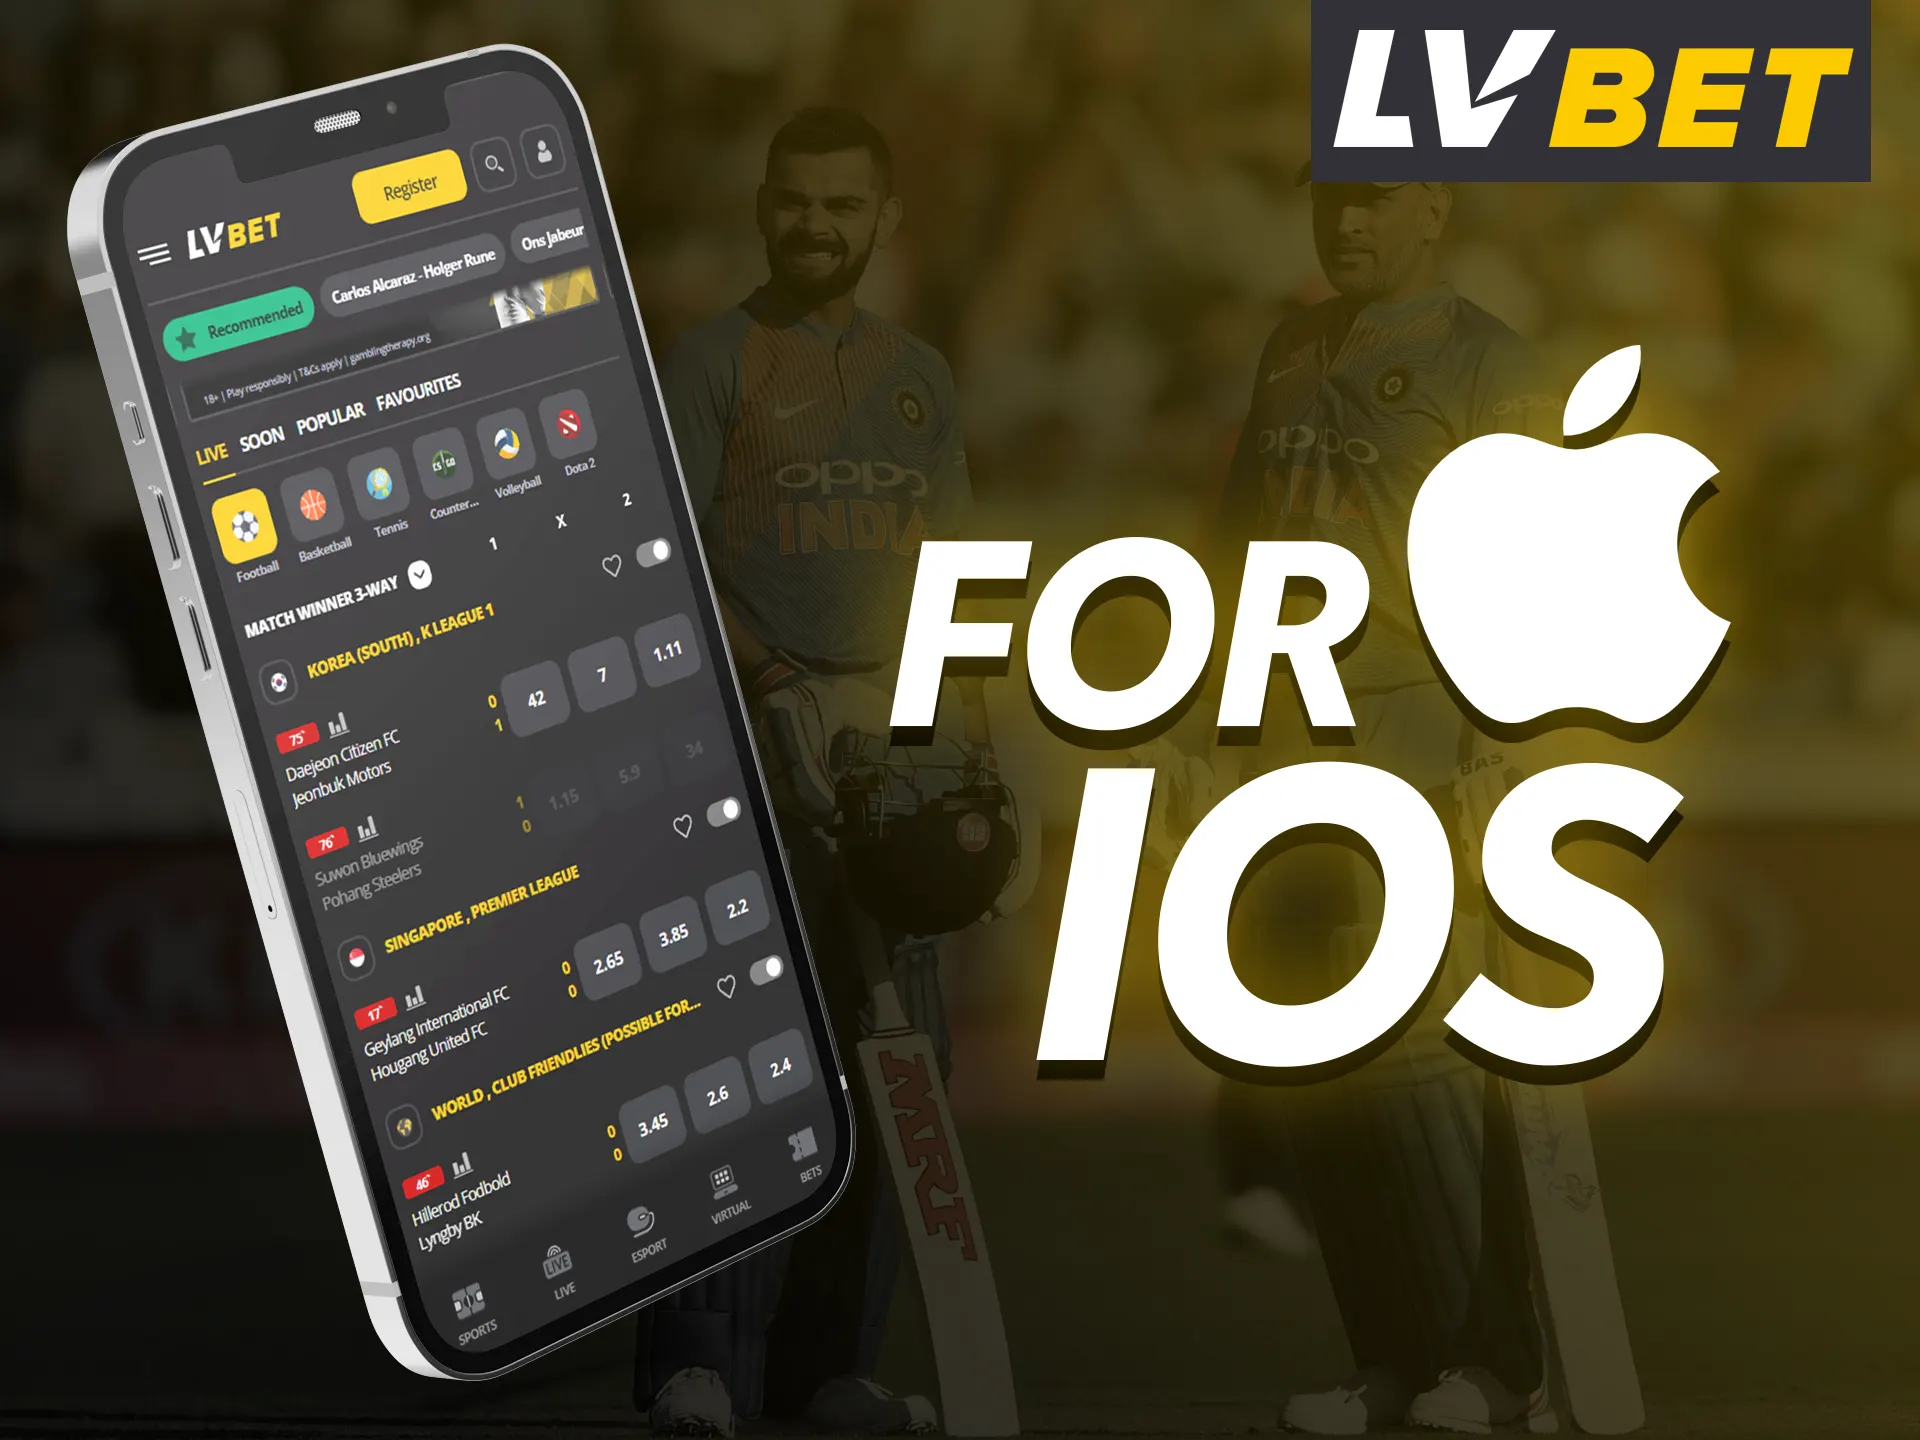 With LV Bet you can place bets on your iOS phone using the special app.